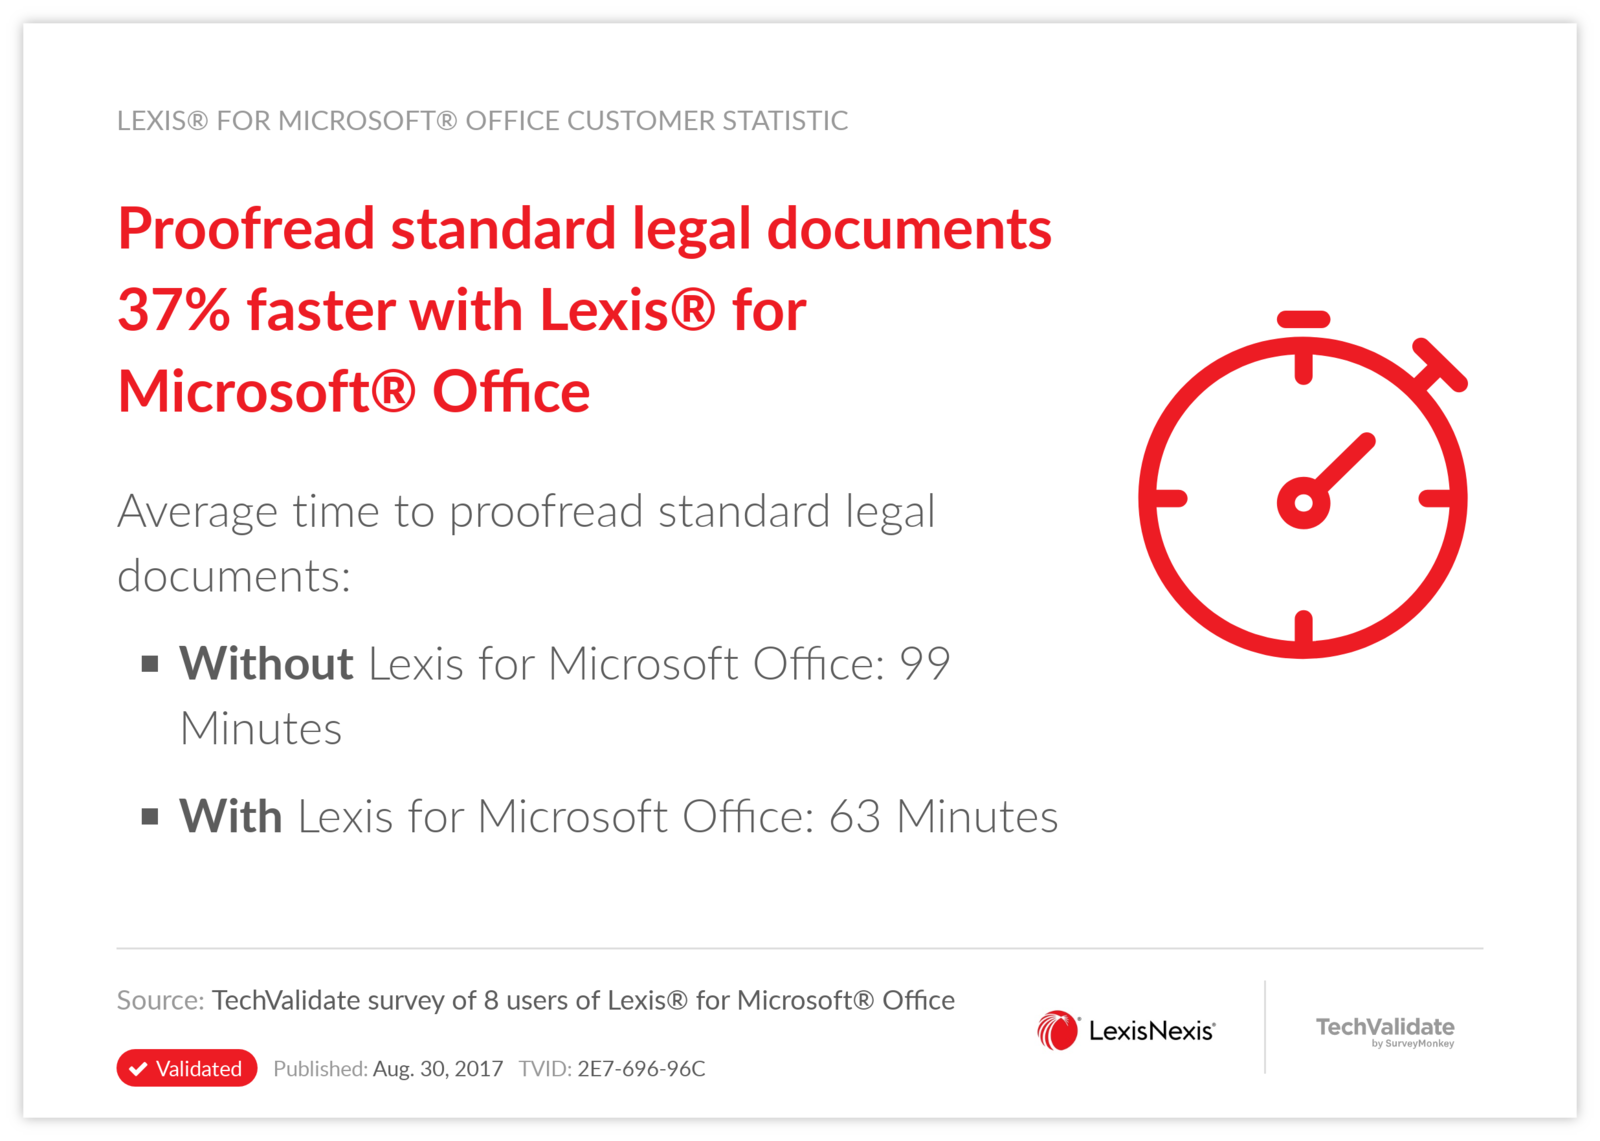 Proofread standard legal documents 37% faster with Lexis® for Microsoft® Office